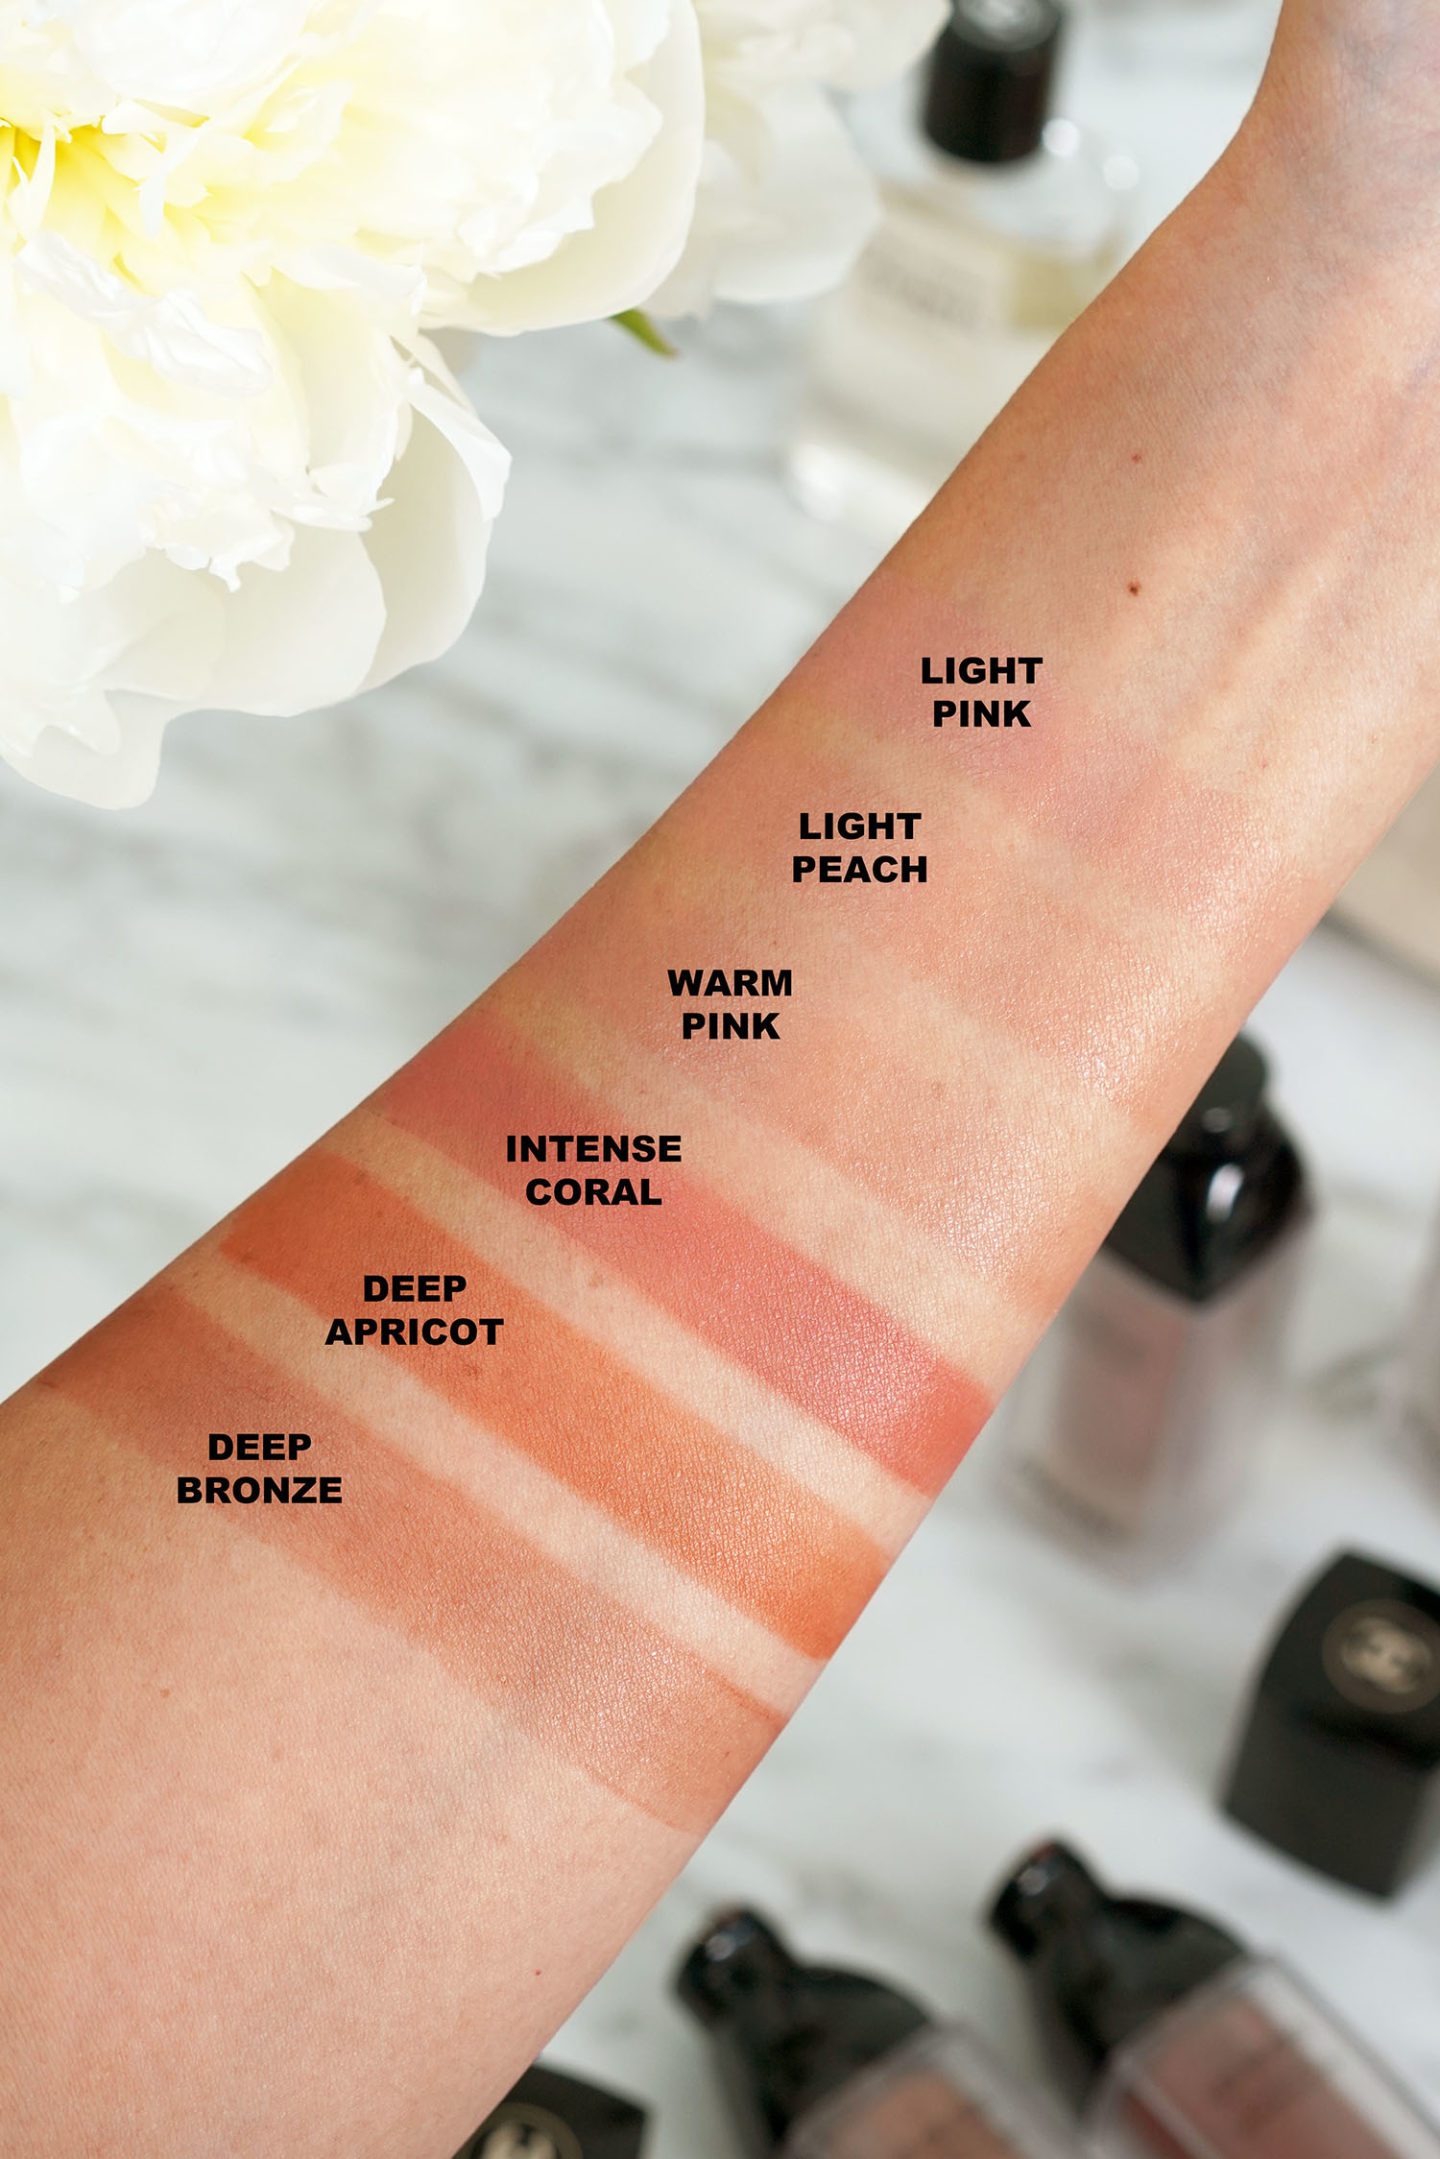 Chanel Les Beiges Water-Fresh Blush swatches